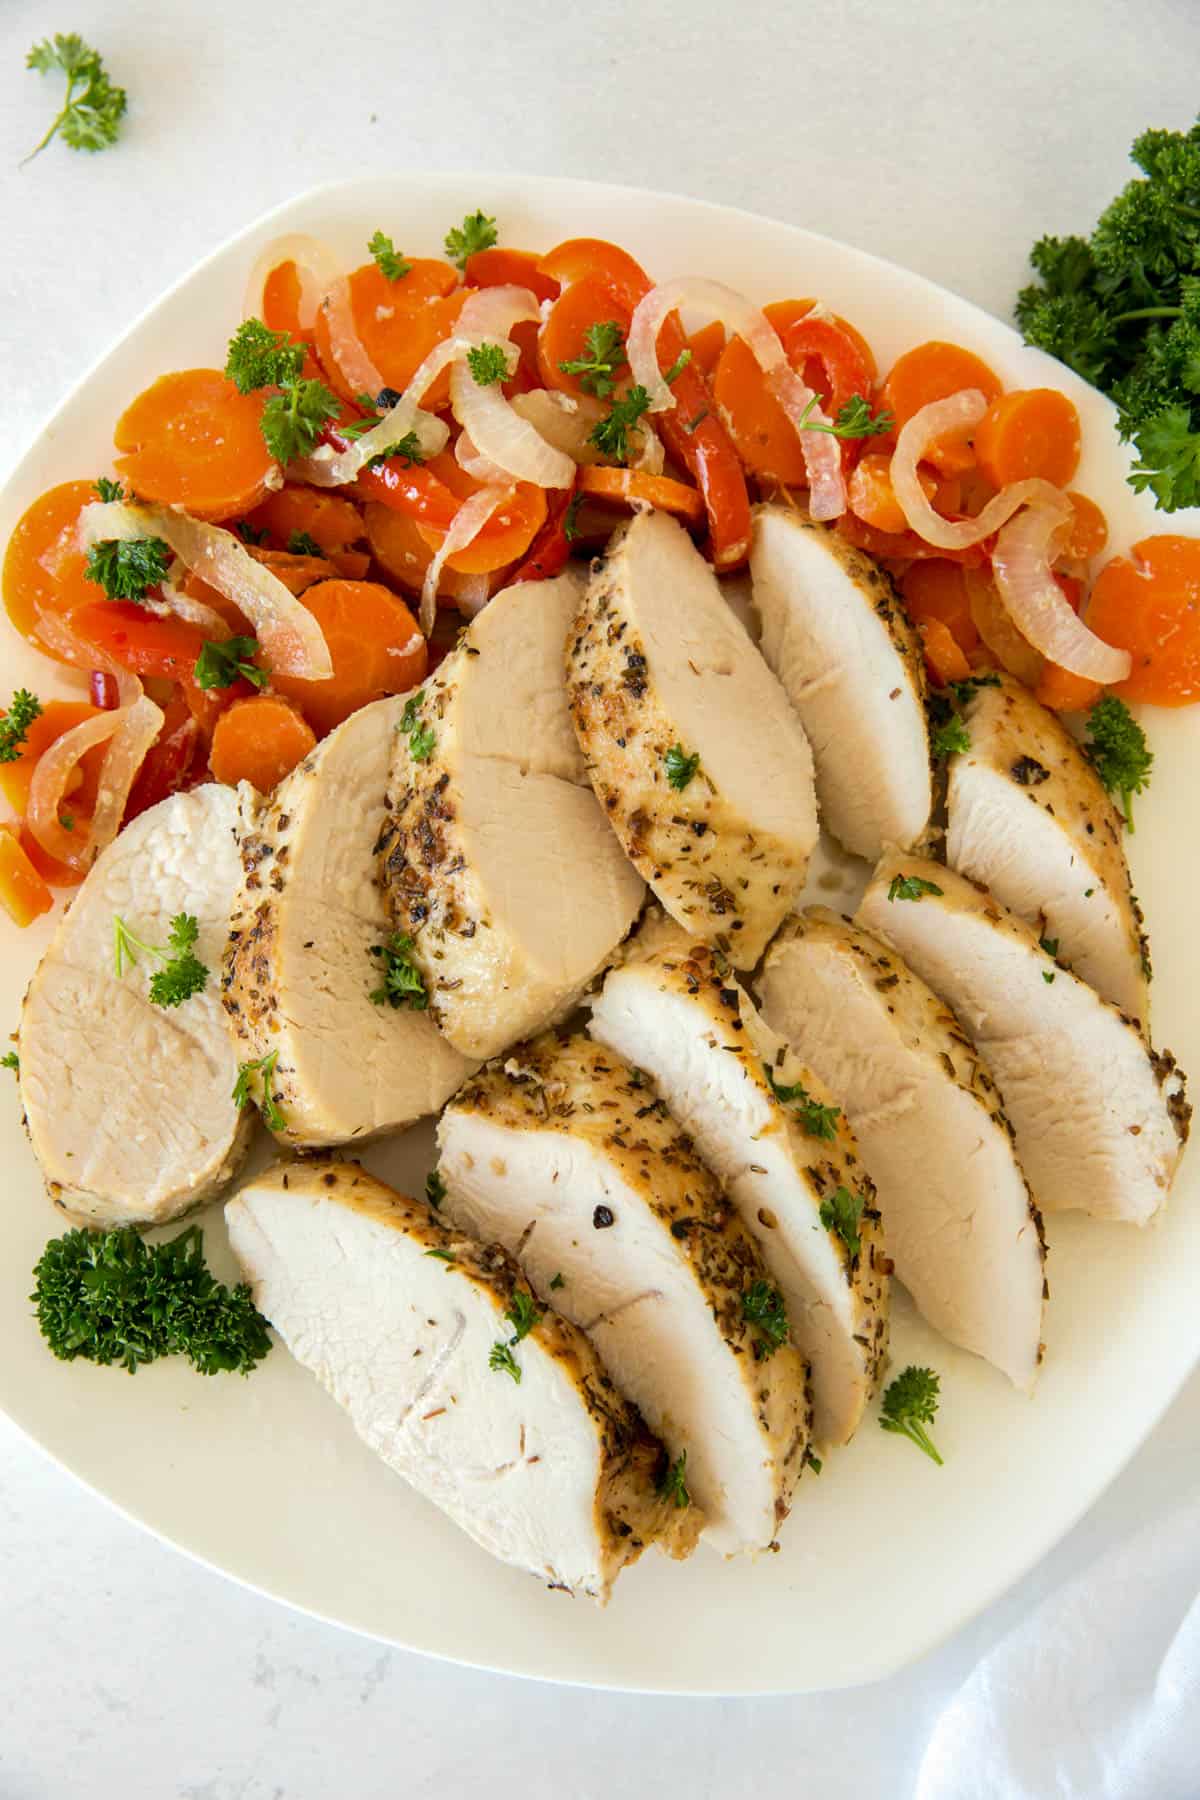 Baked easy turkey tenderloin sliced on a plate and served with carrots, peppers and onions.